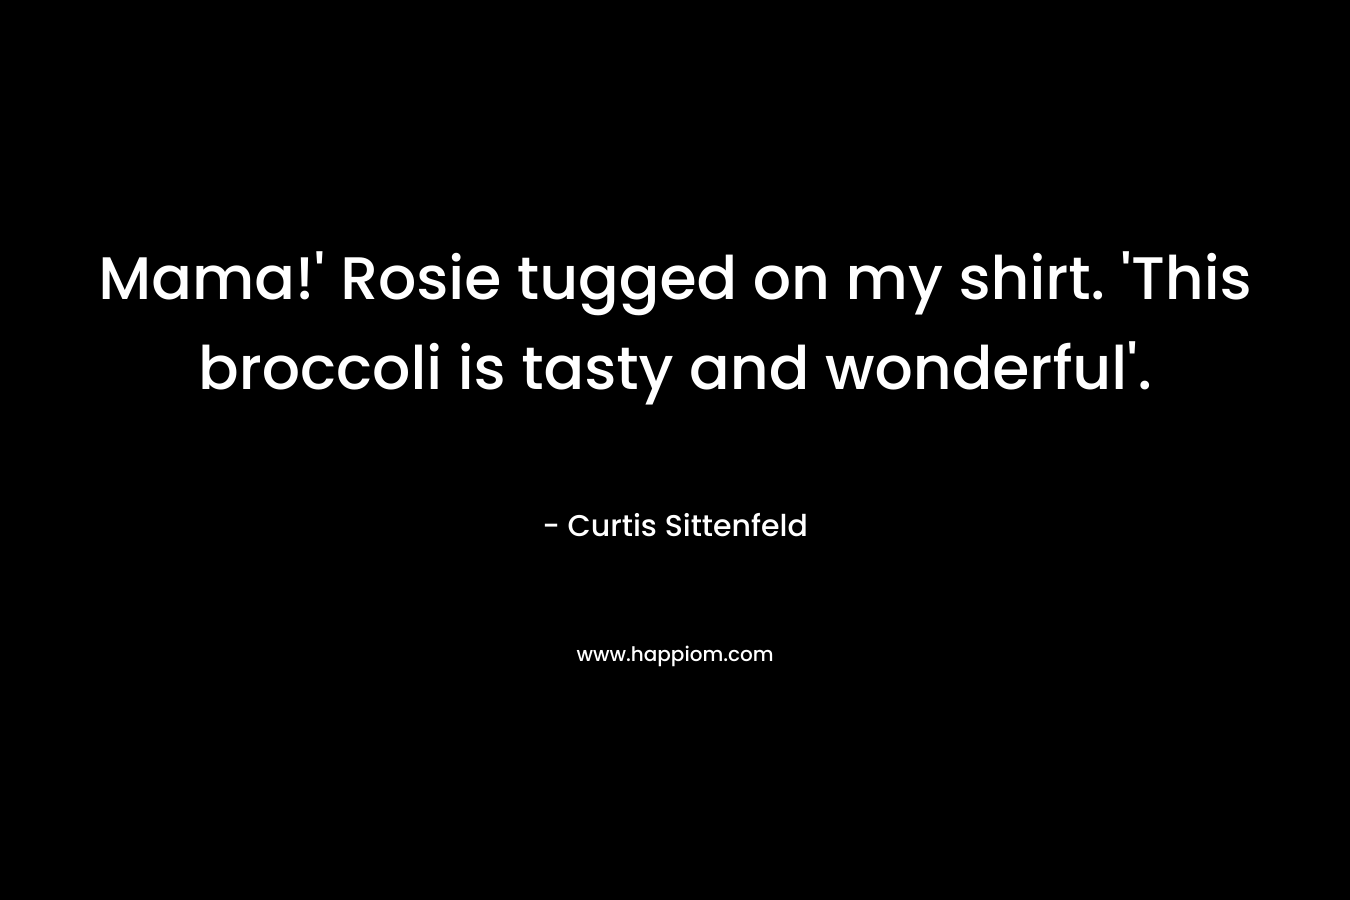 Mama!’ Rosie tugged on my shirt. ‘This broccoli is tasty and wonderful’. – Curtis Sittenfeld